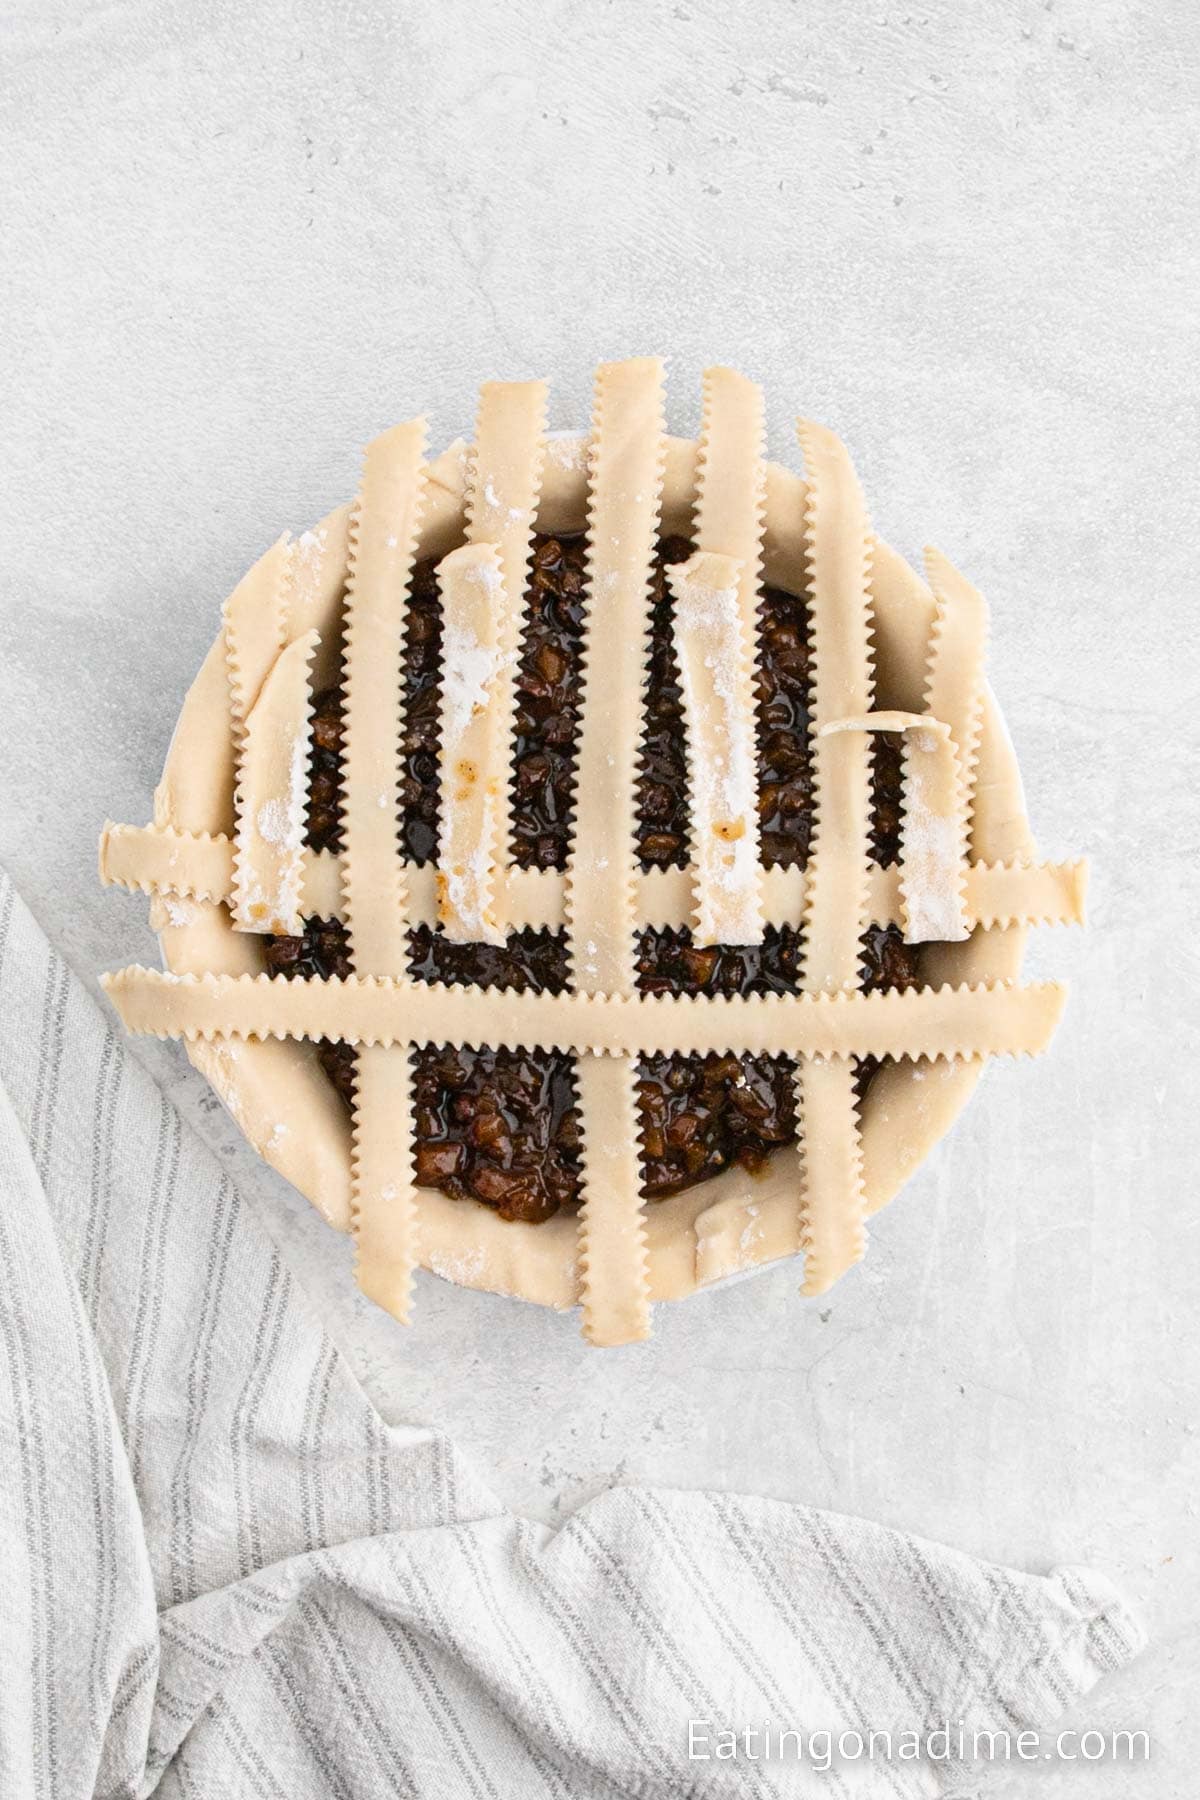 Mincemeat Pie Recipe - Eating on a Dime